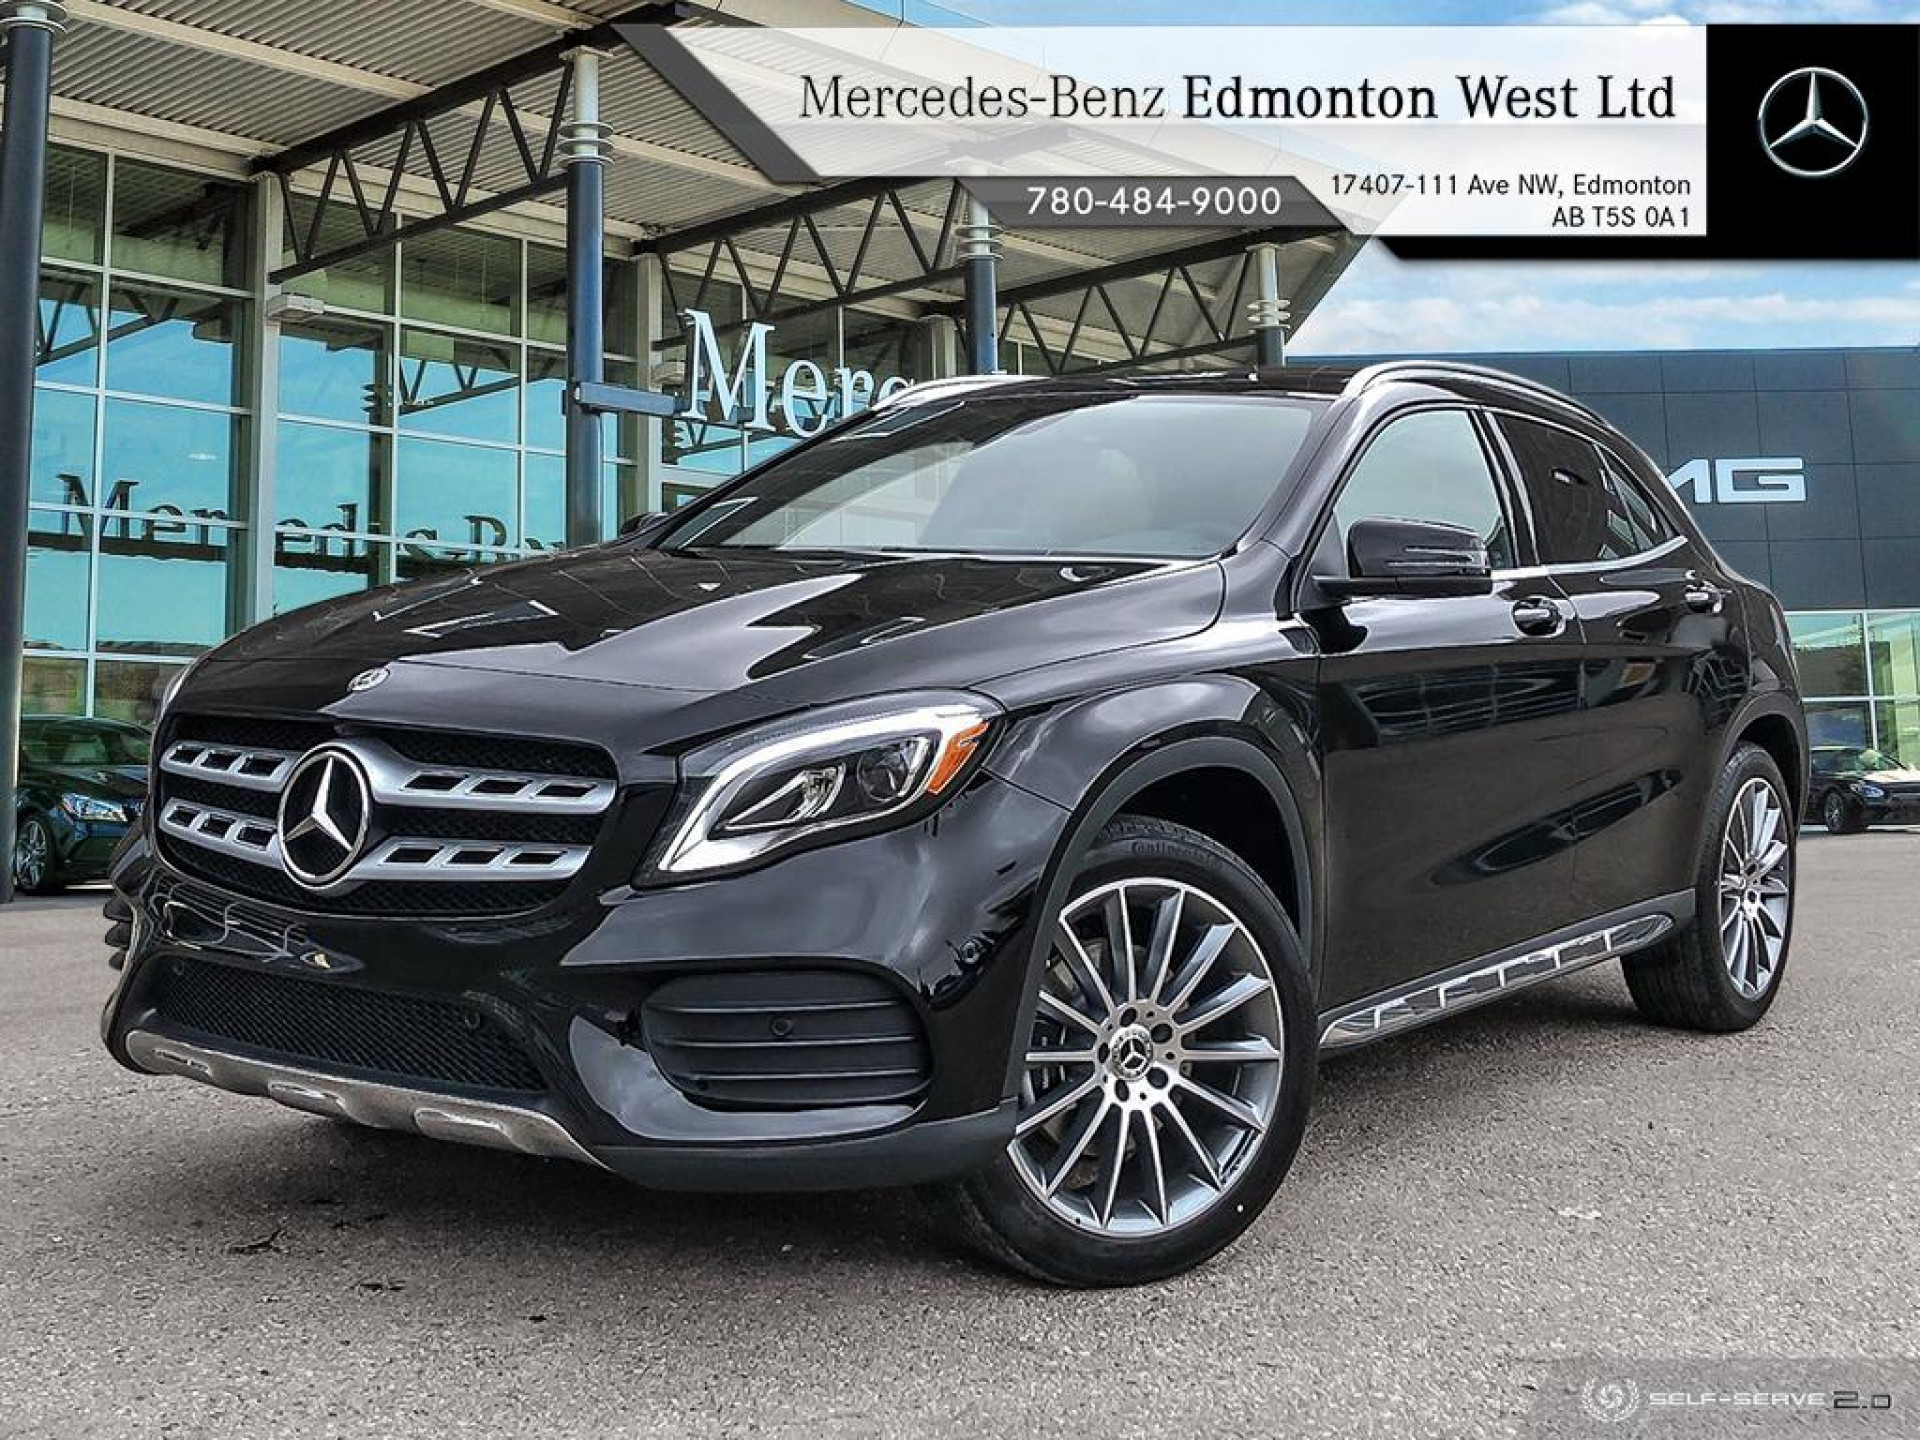 PreOwned 2020 Mercedes Benz GLA 250 4MATIC Demonstration